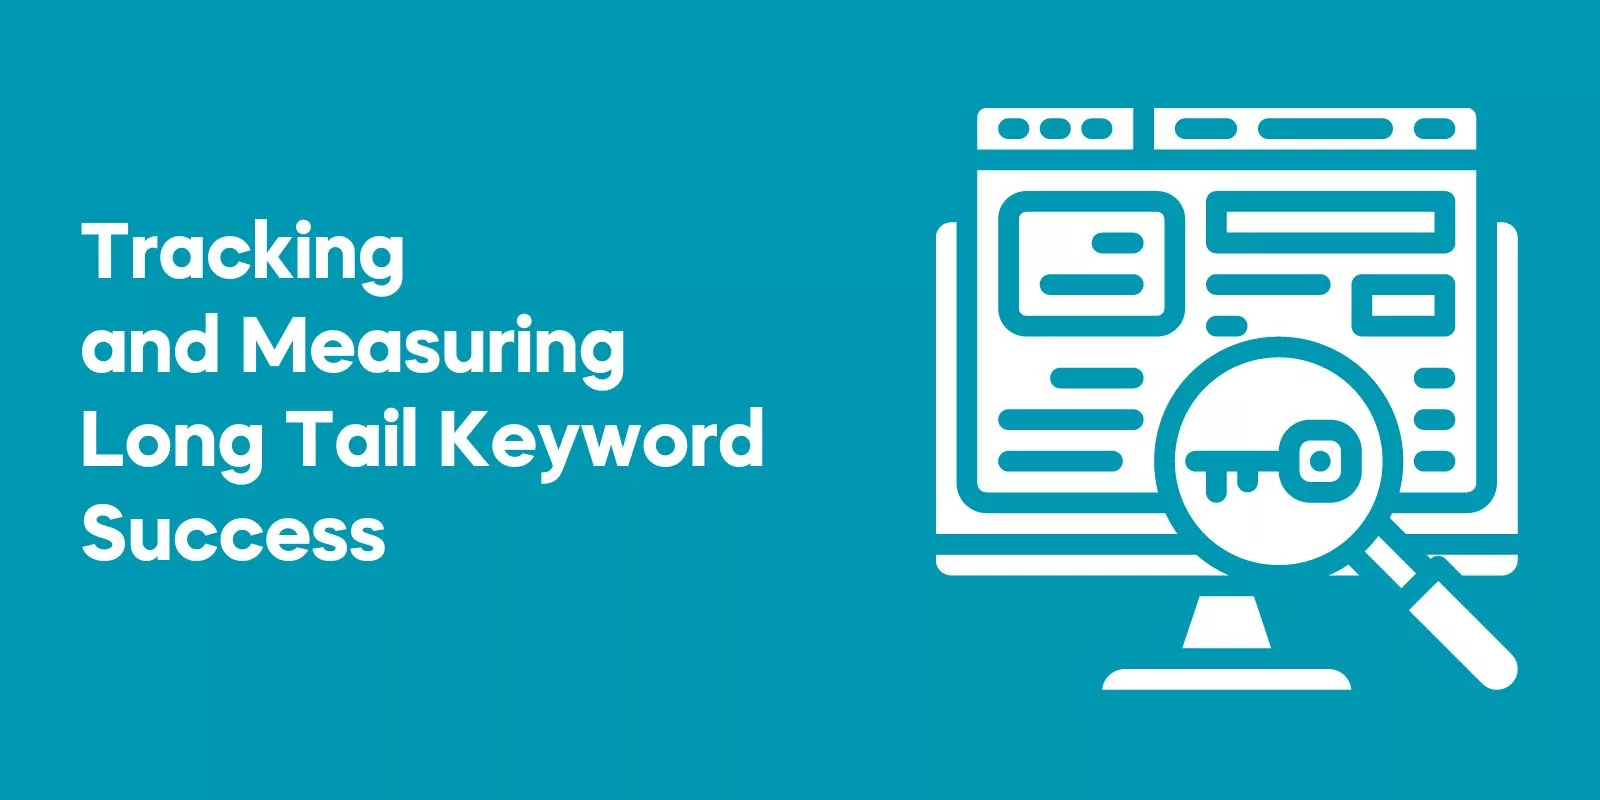 Tracking and Measuring Long Tail Keyword Success